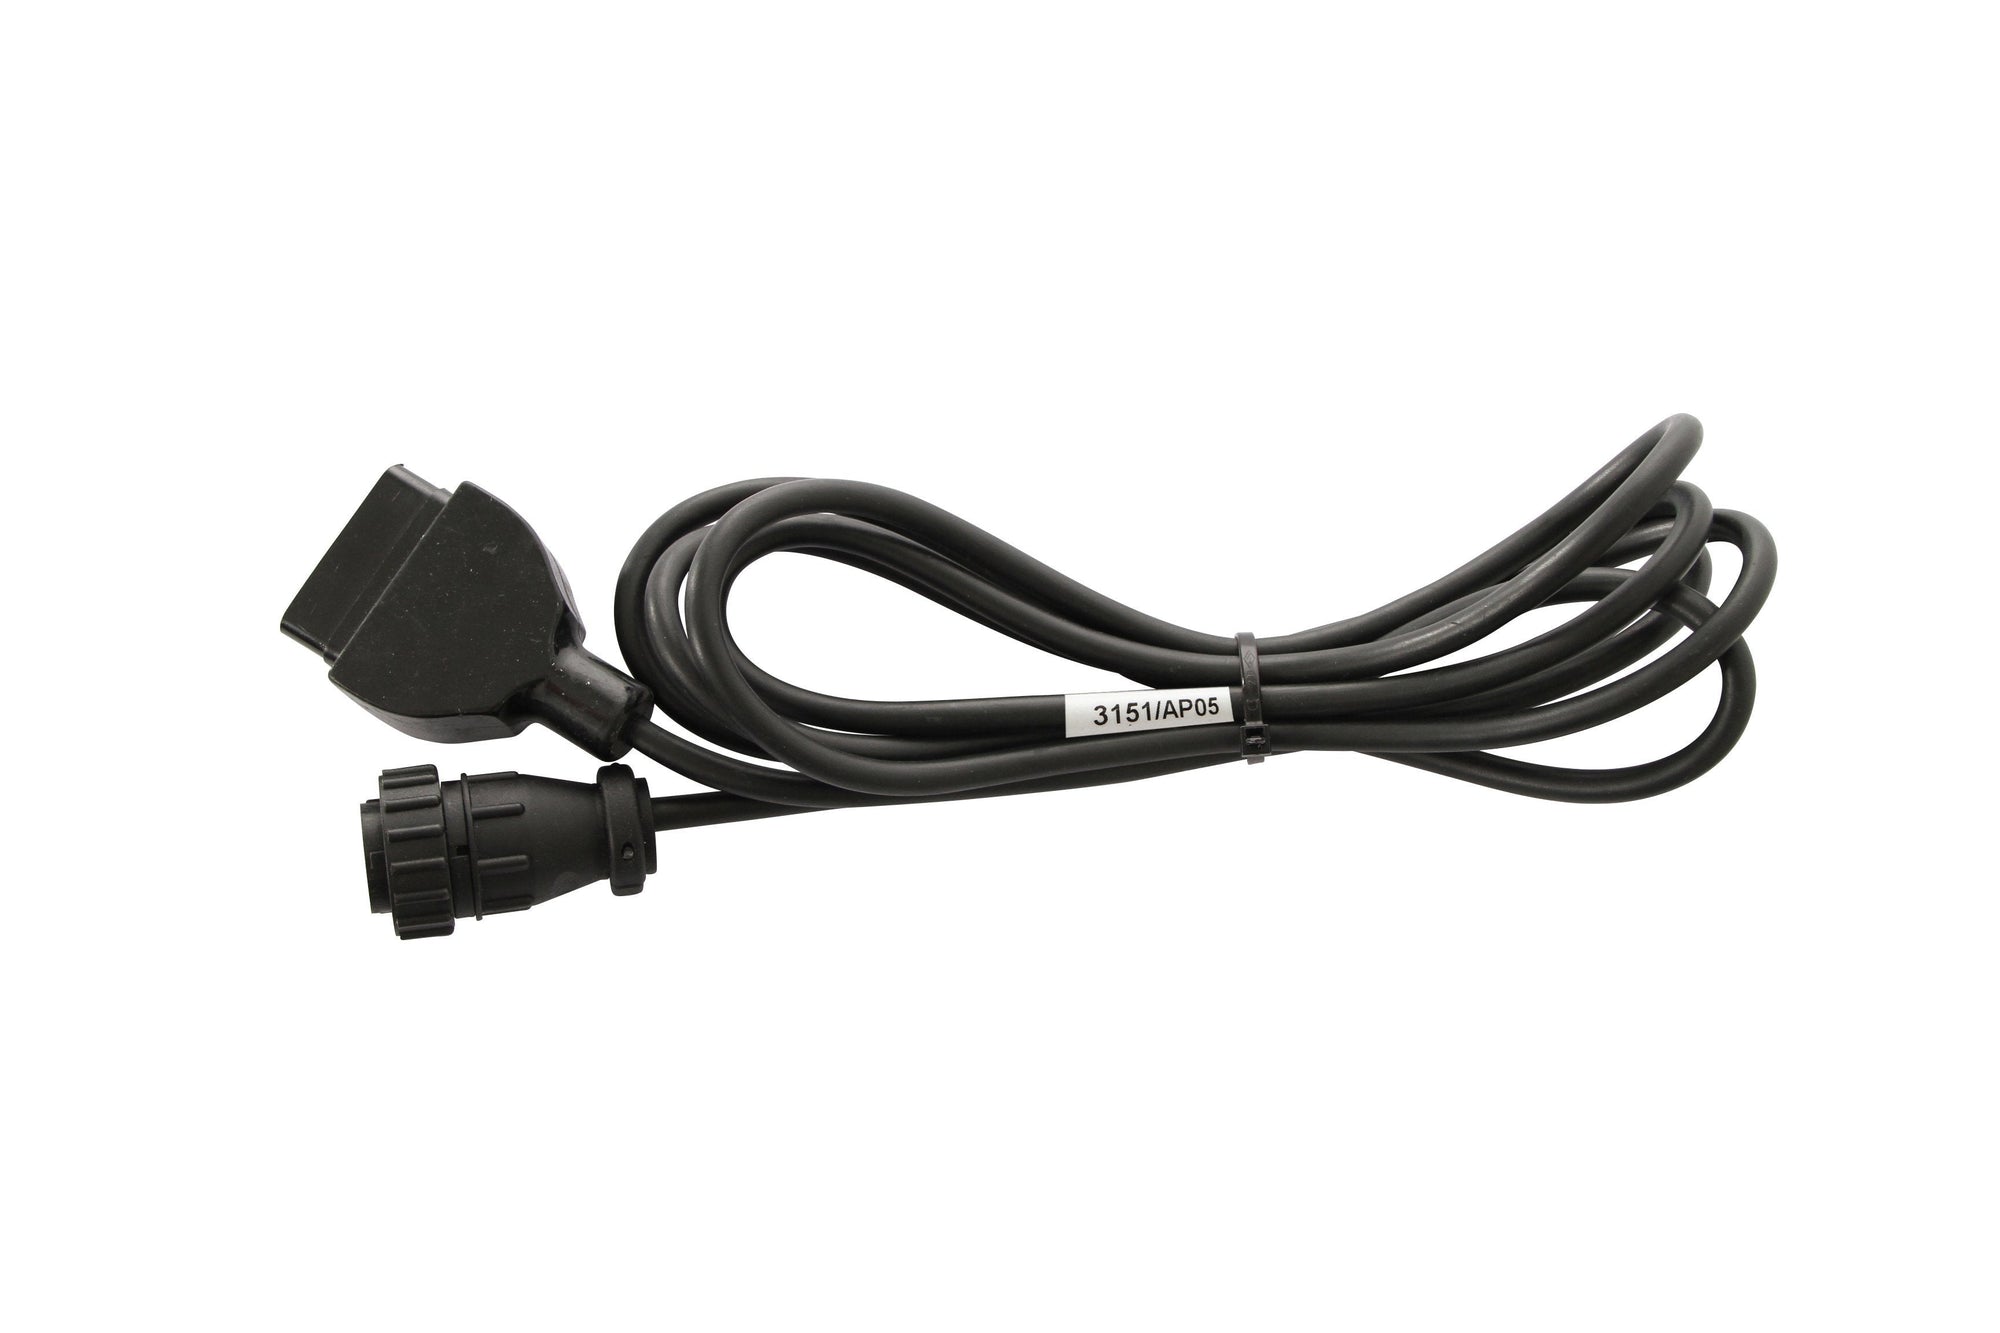 Diagnostic serial cable for ATV-QUAD vehicles for the brand (AP50)